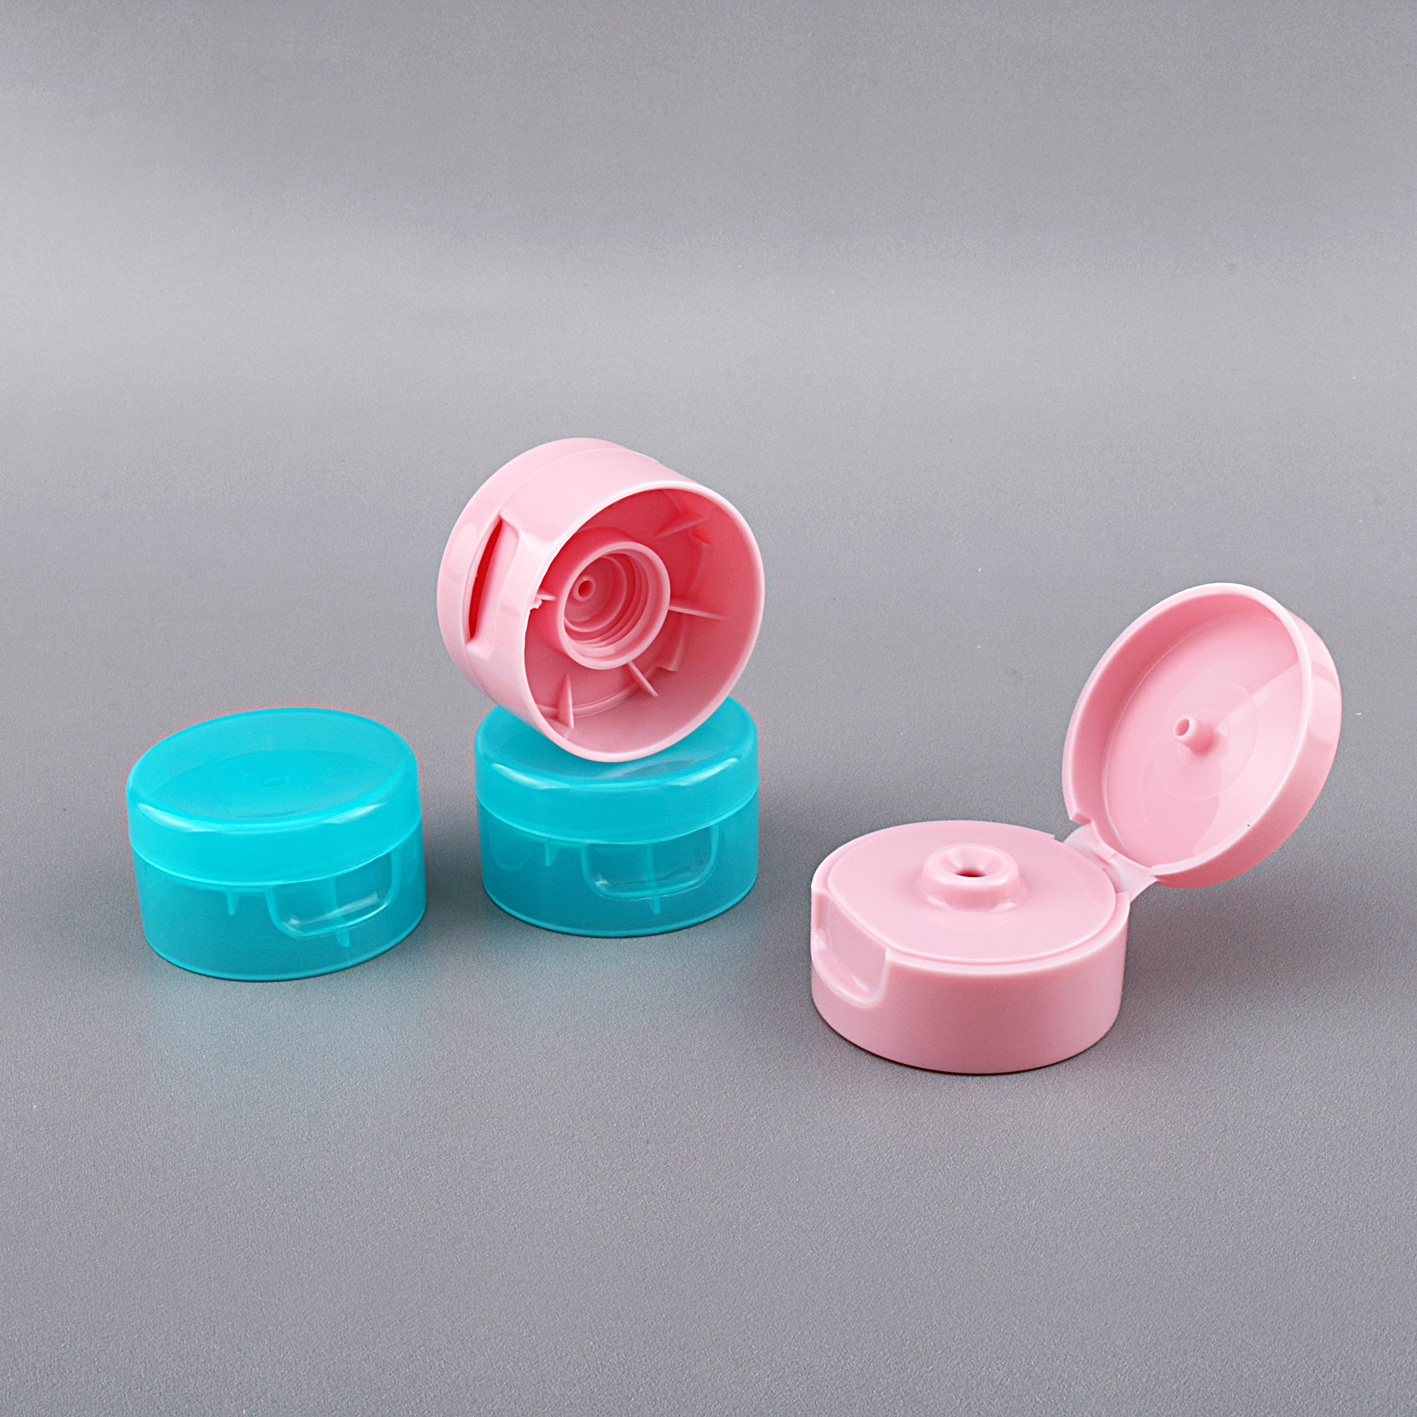 40mm_Diameter_Customized_Cleanser_Tubes_with_Glossy_Flip_Top_Caps2